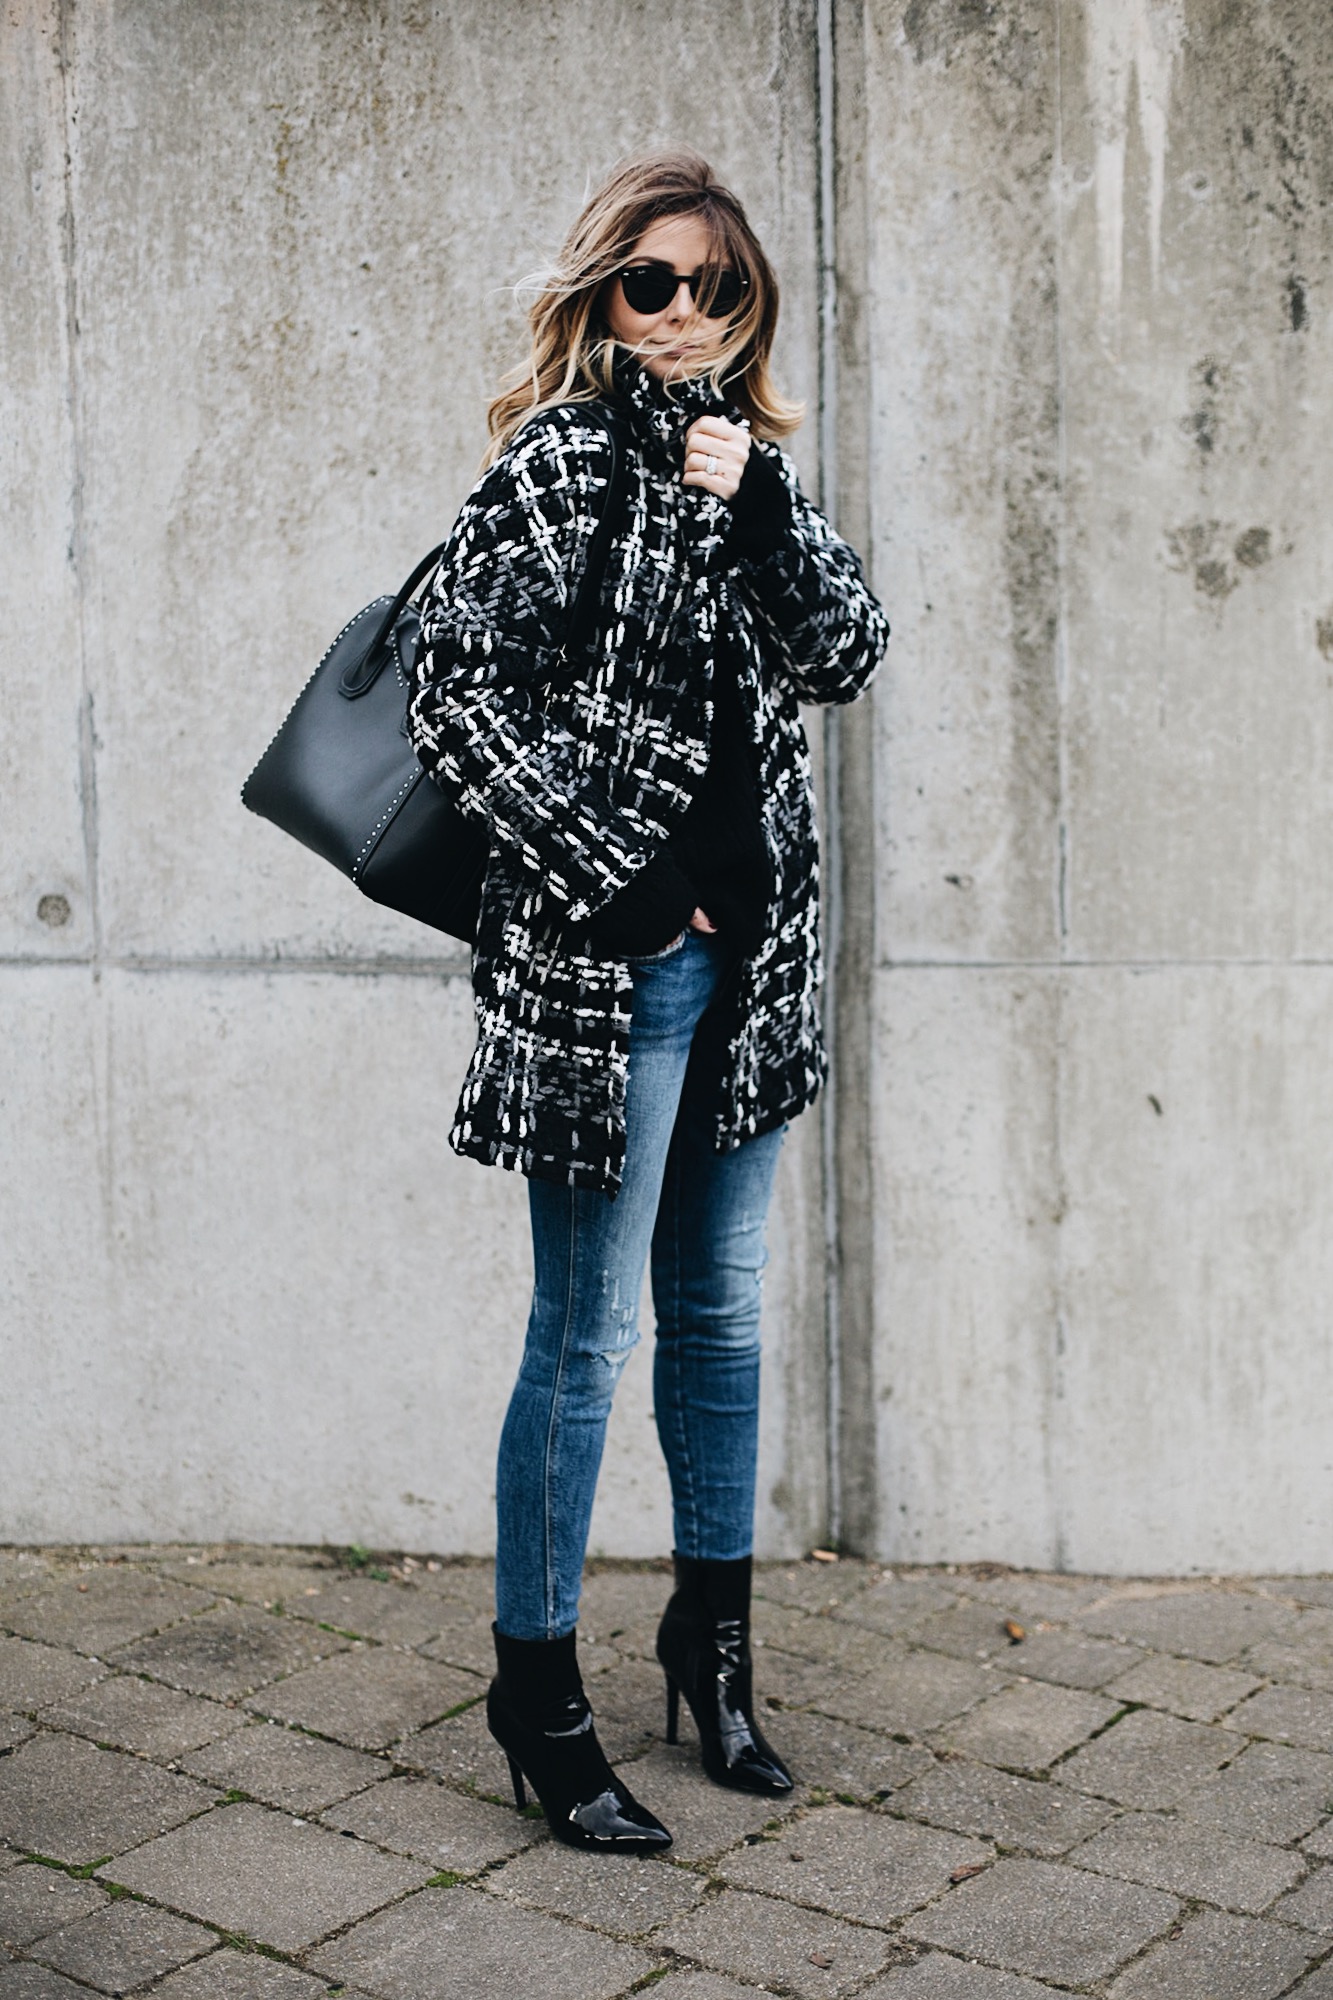 monochrome winter coat, black Givenchy studded Antigona bag medium, ripped skinny jeans, vinyl patent black heeled ankle boots, chic winter outfit